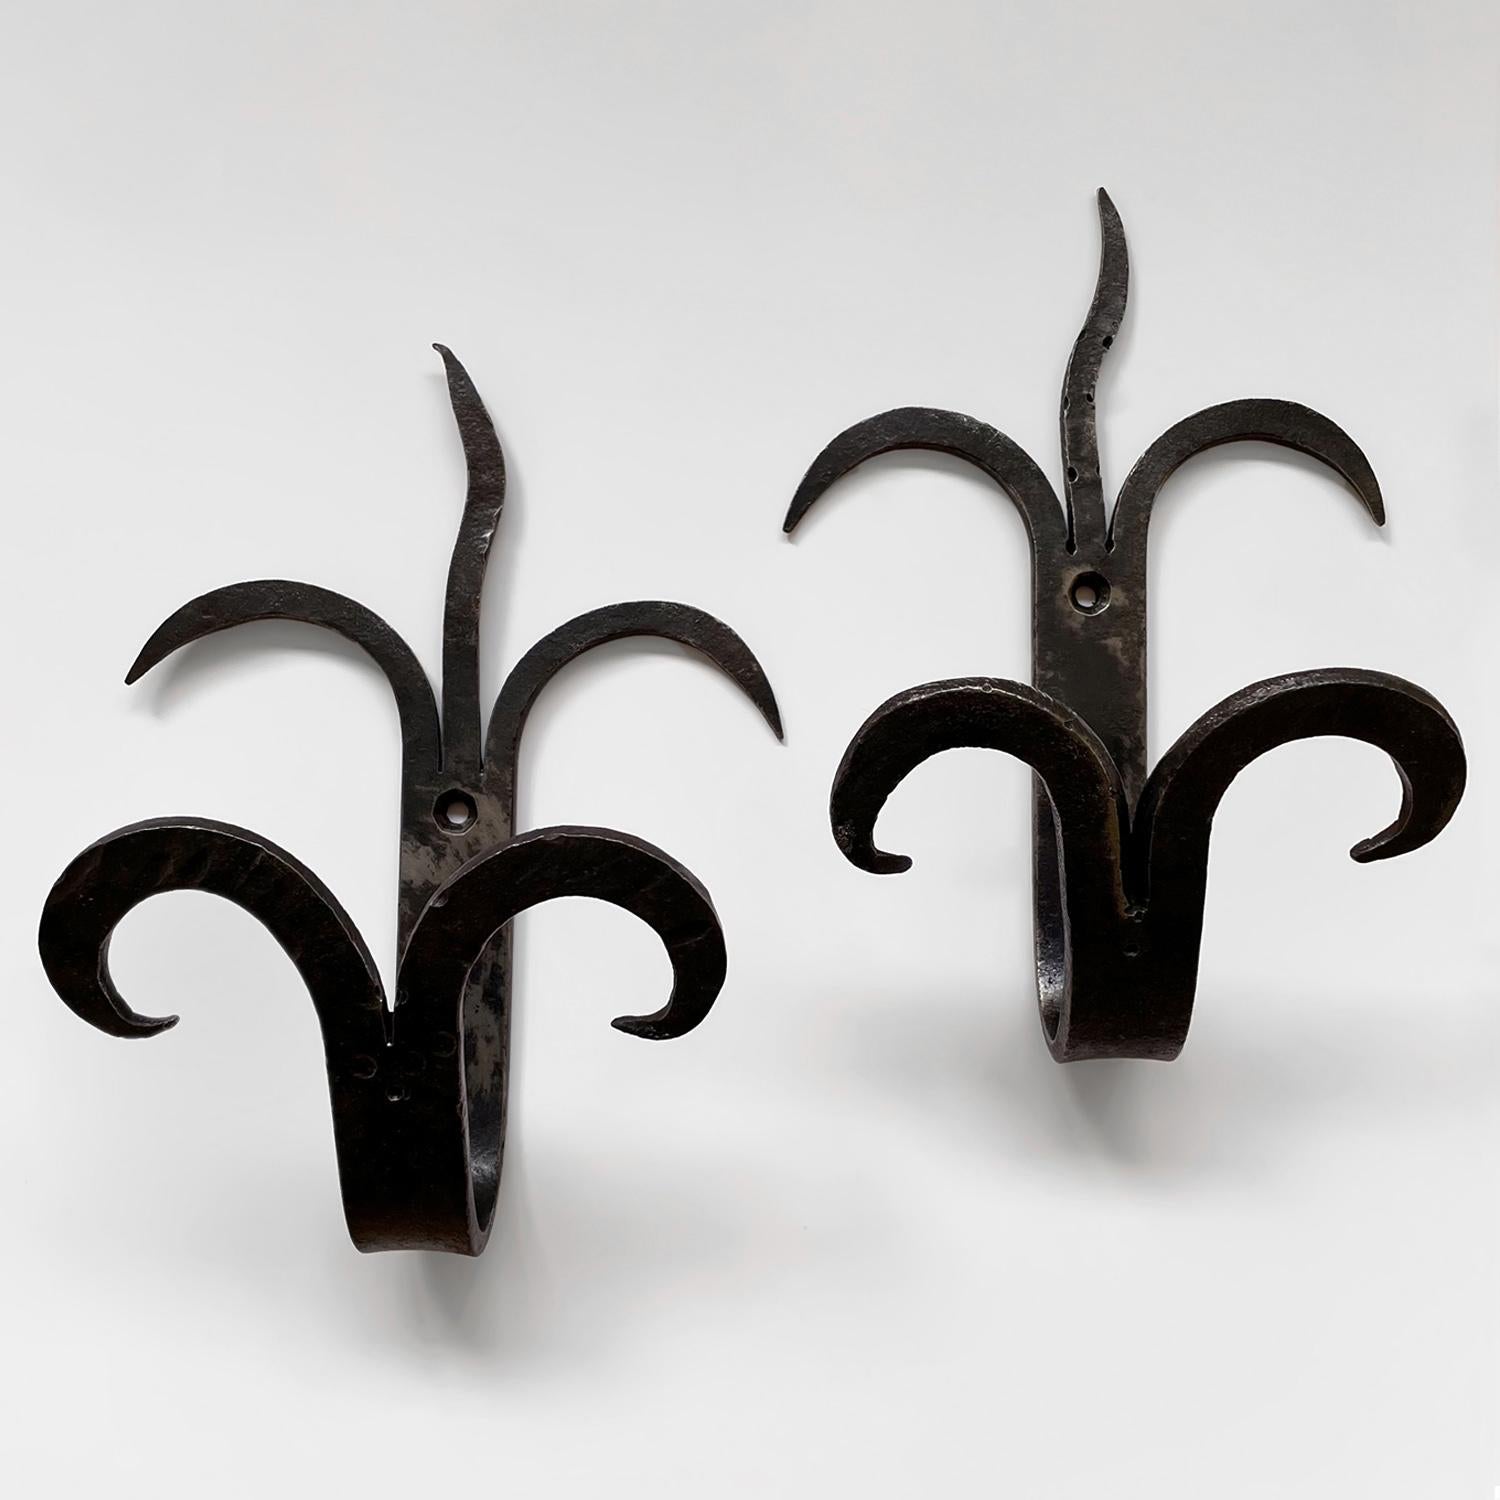 Pair of French forged iron double wall hooks
France, early 20th century
These beautifully sculpted wall hooks are a dramatic statement piece for an entry
Each hook is slightly unique in its composition
Whimsical double arched lower hooks provide two